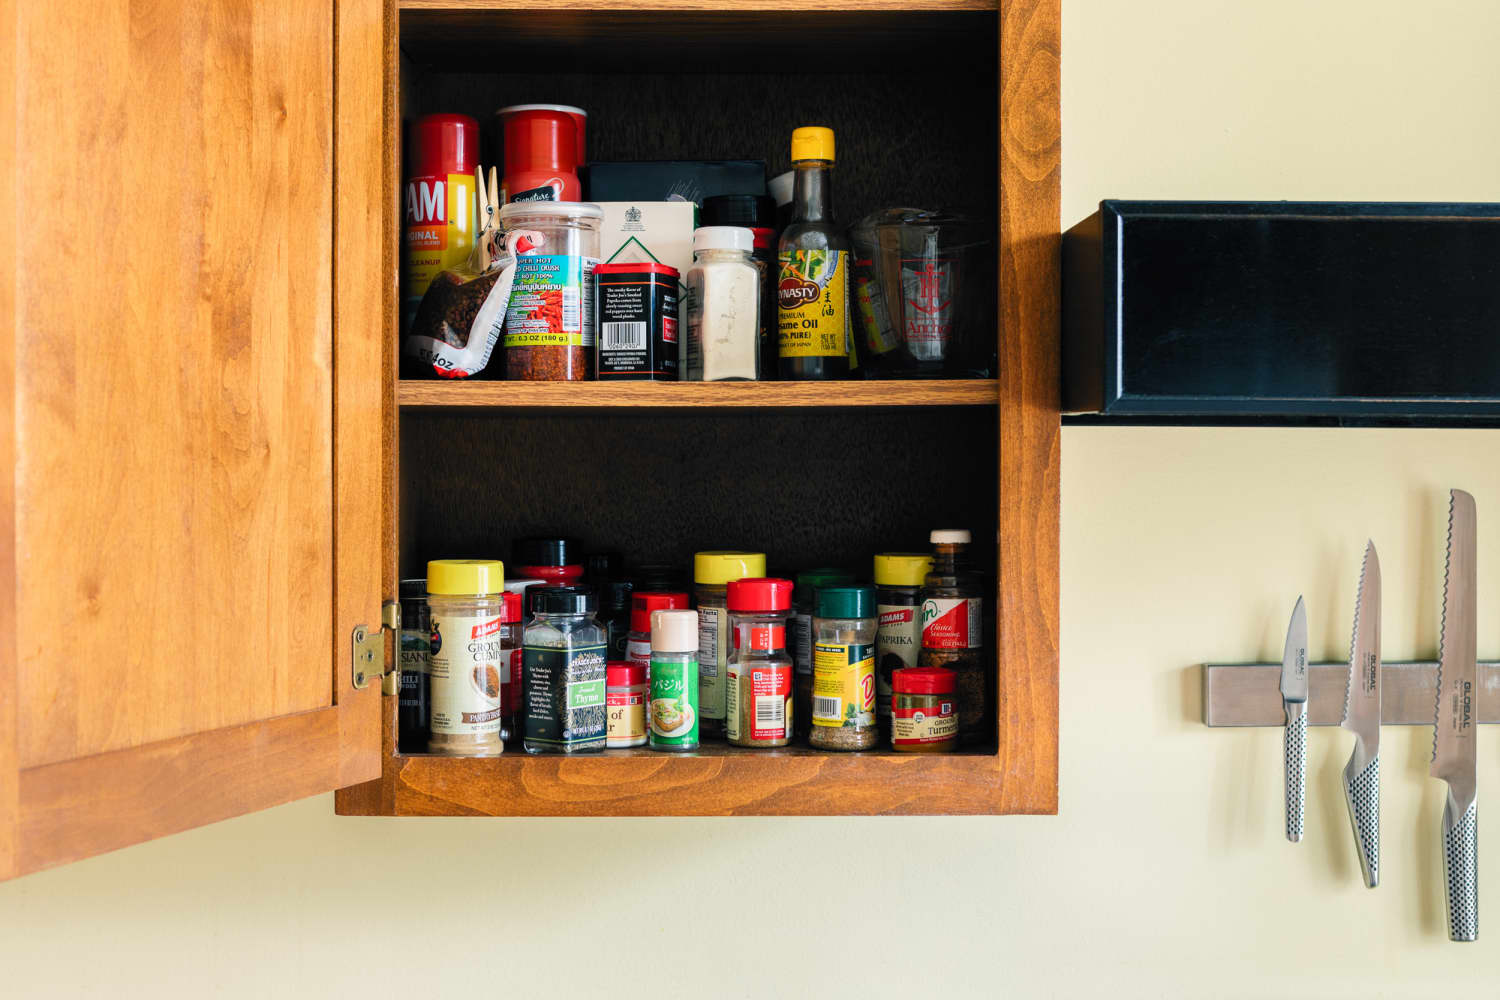 DIY Spice Rack - Easy Wooden Spice Rack For Countertop Or Wall